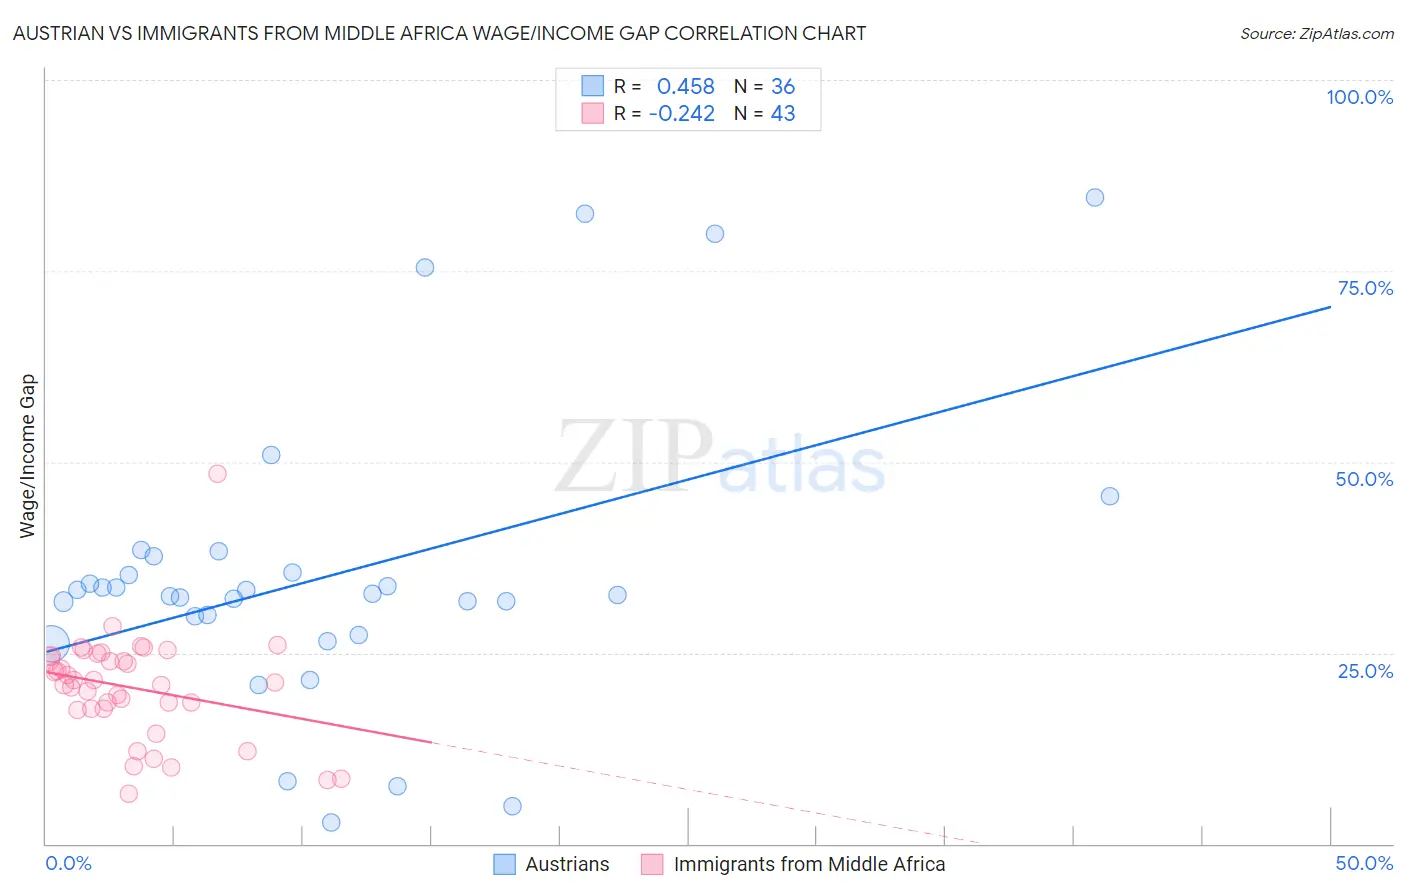 Austrian vs Immigrants from Middle Africa Wage/Income Gap